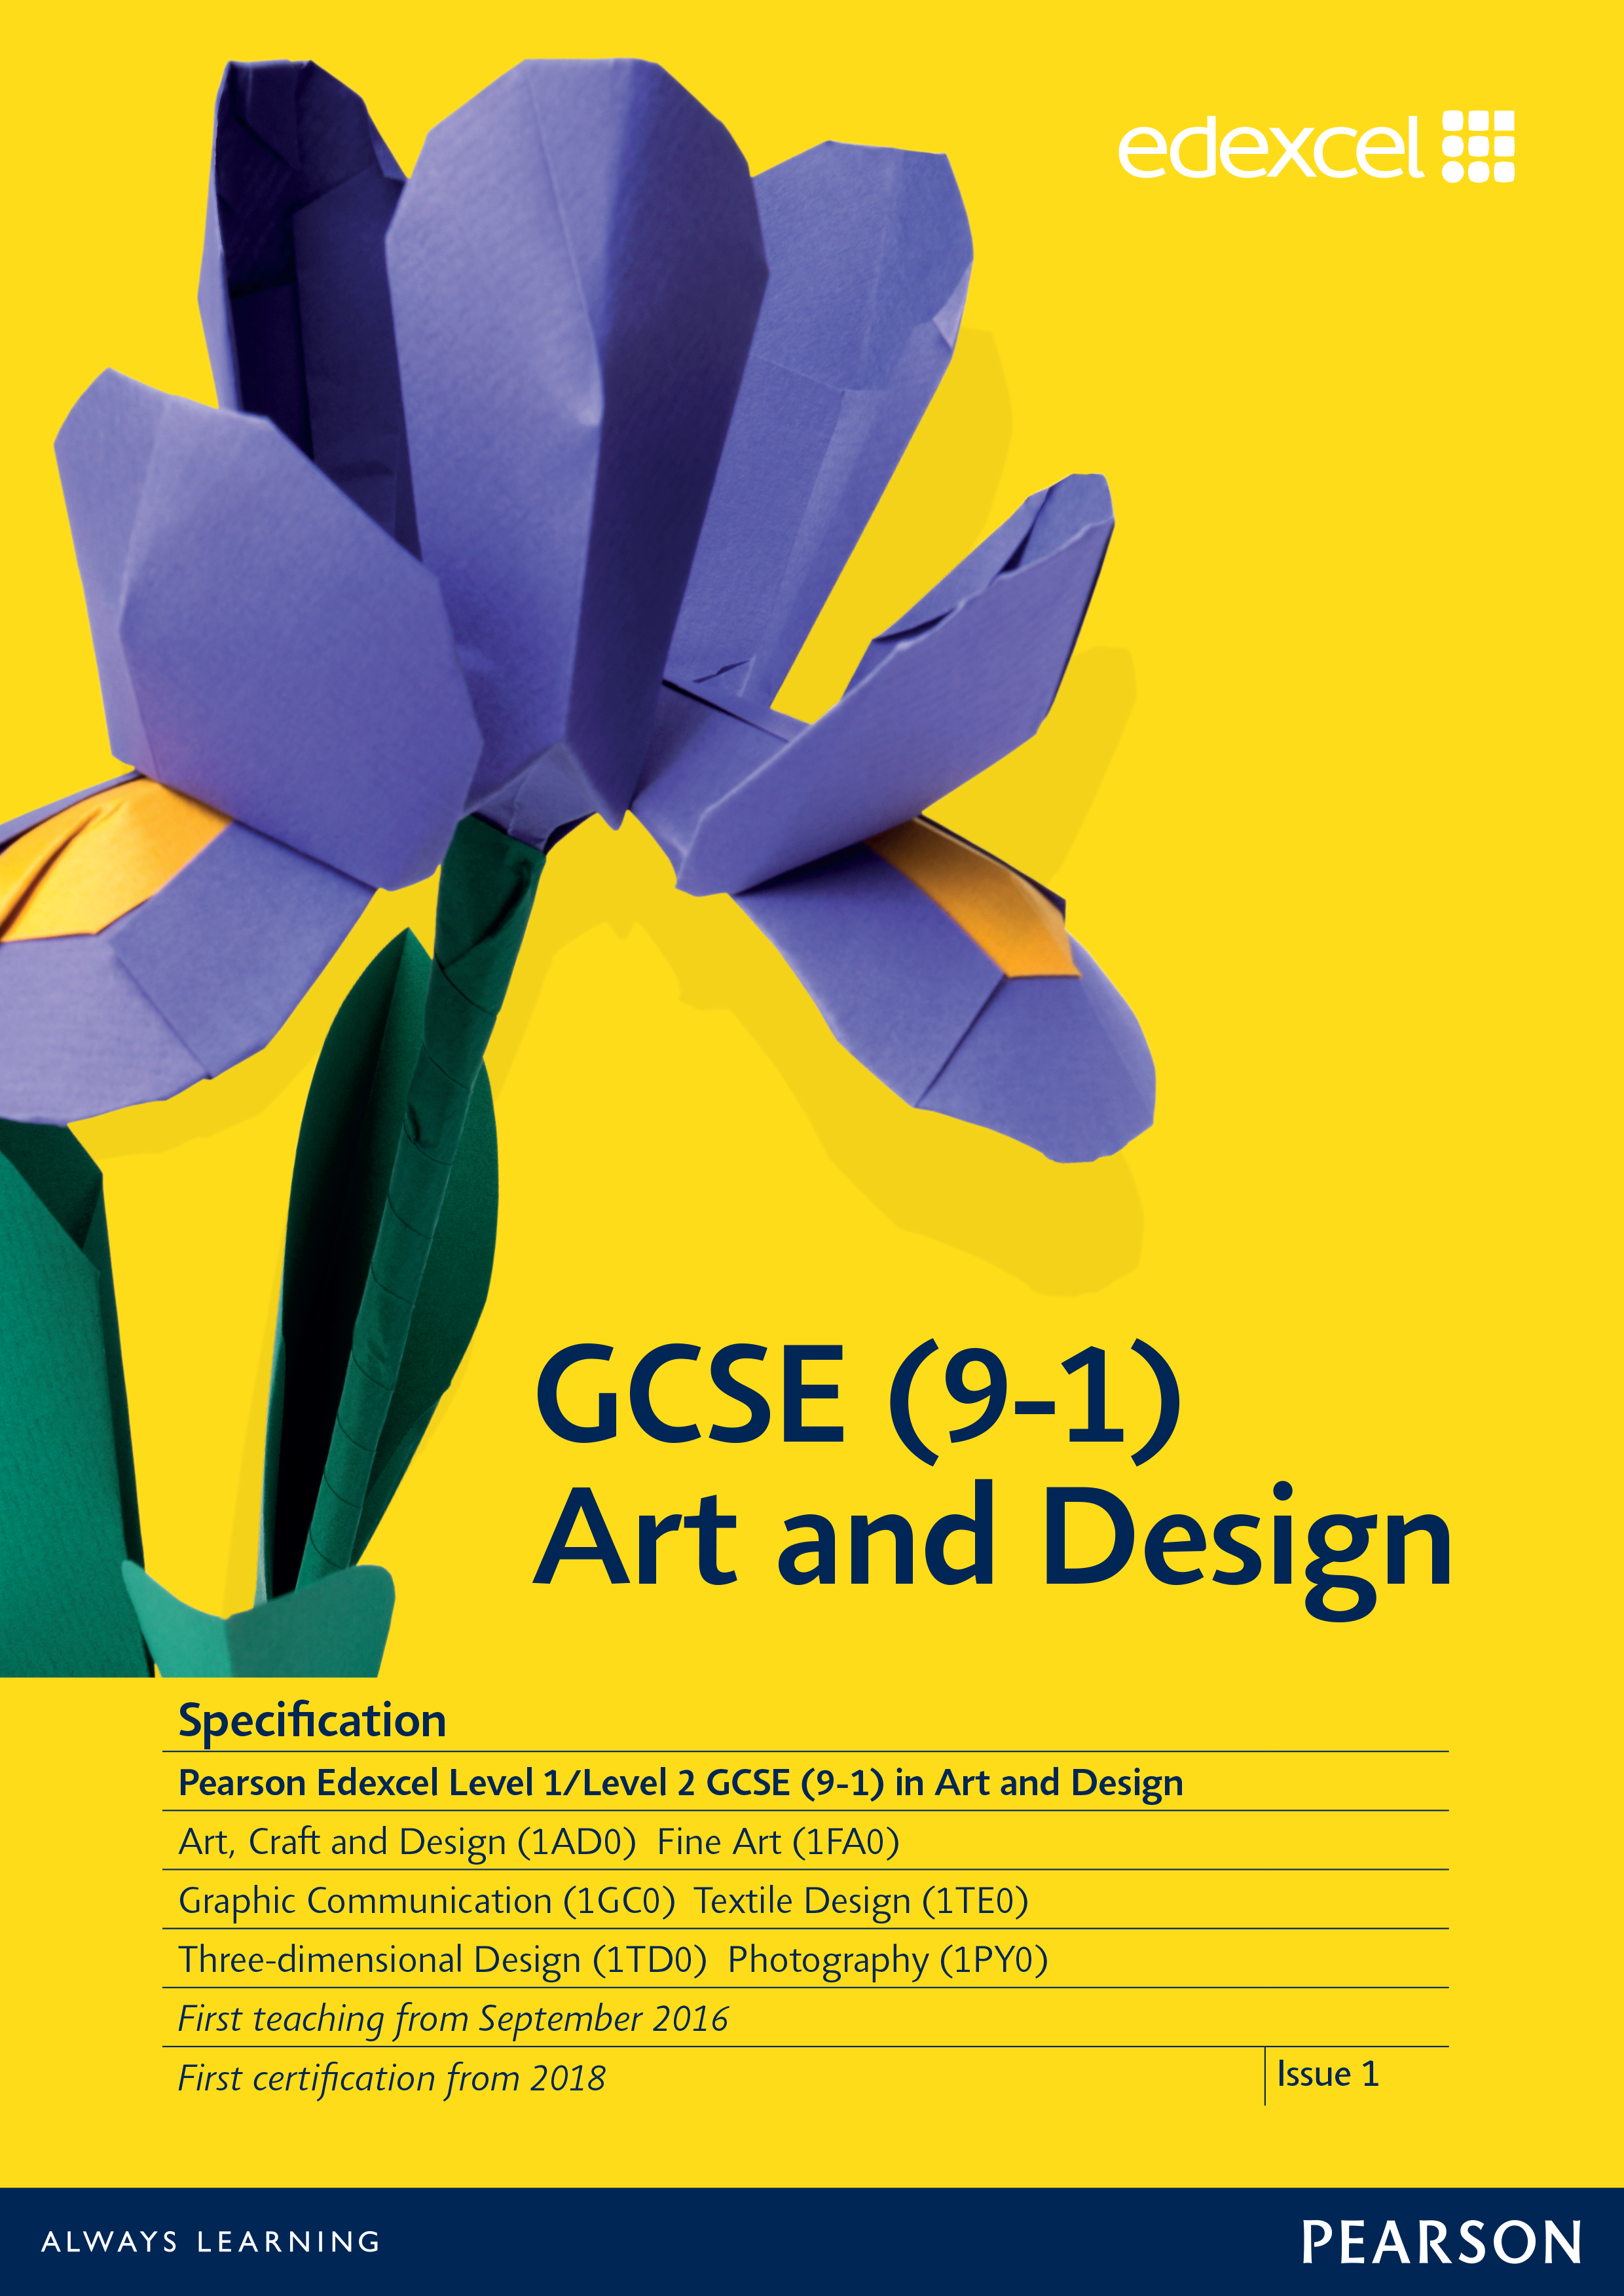 Link to Edexcel GCSE Art and Design (2016) specification page